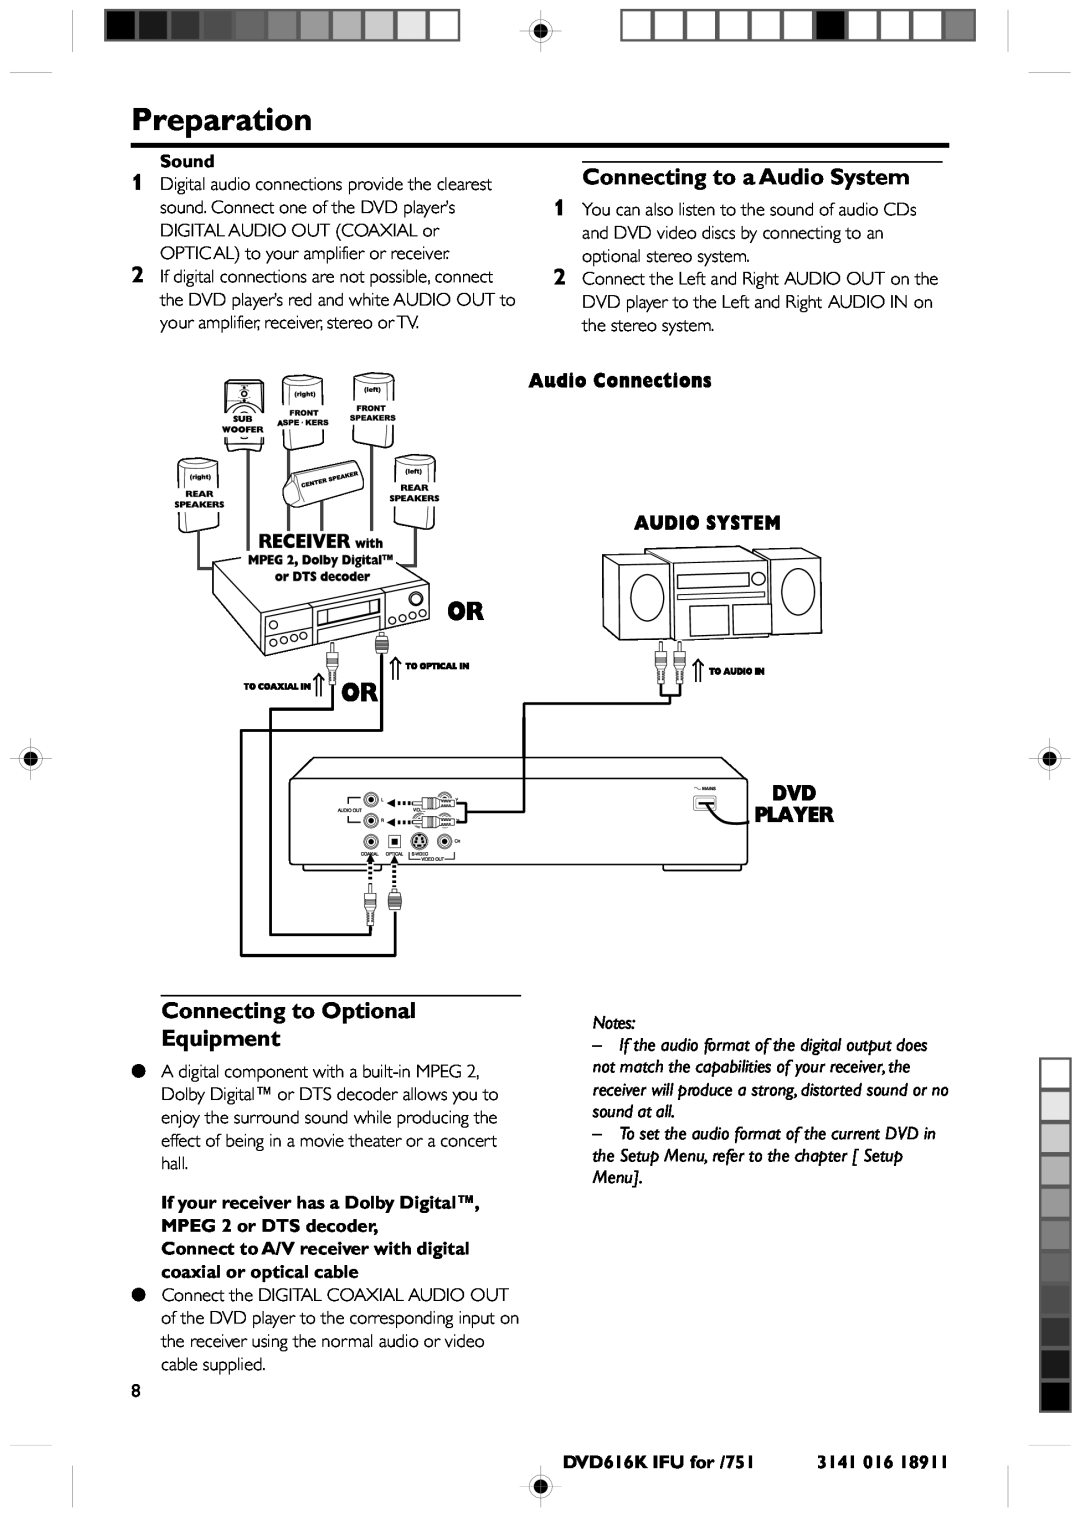 Philips DVD616K manual Preparation, Connecting to Optional Equipment, Connecting to a Audio System 